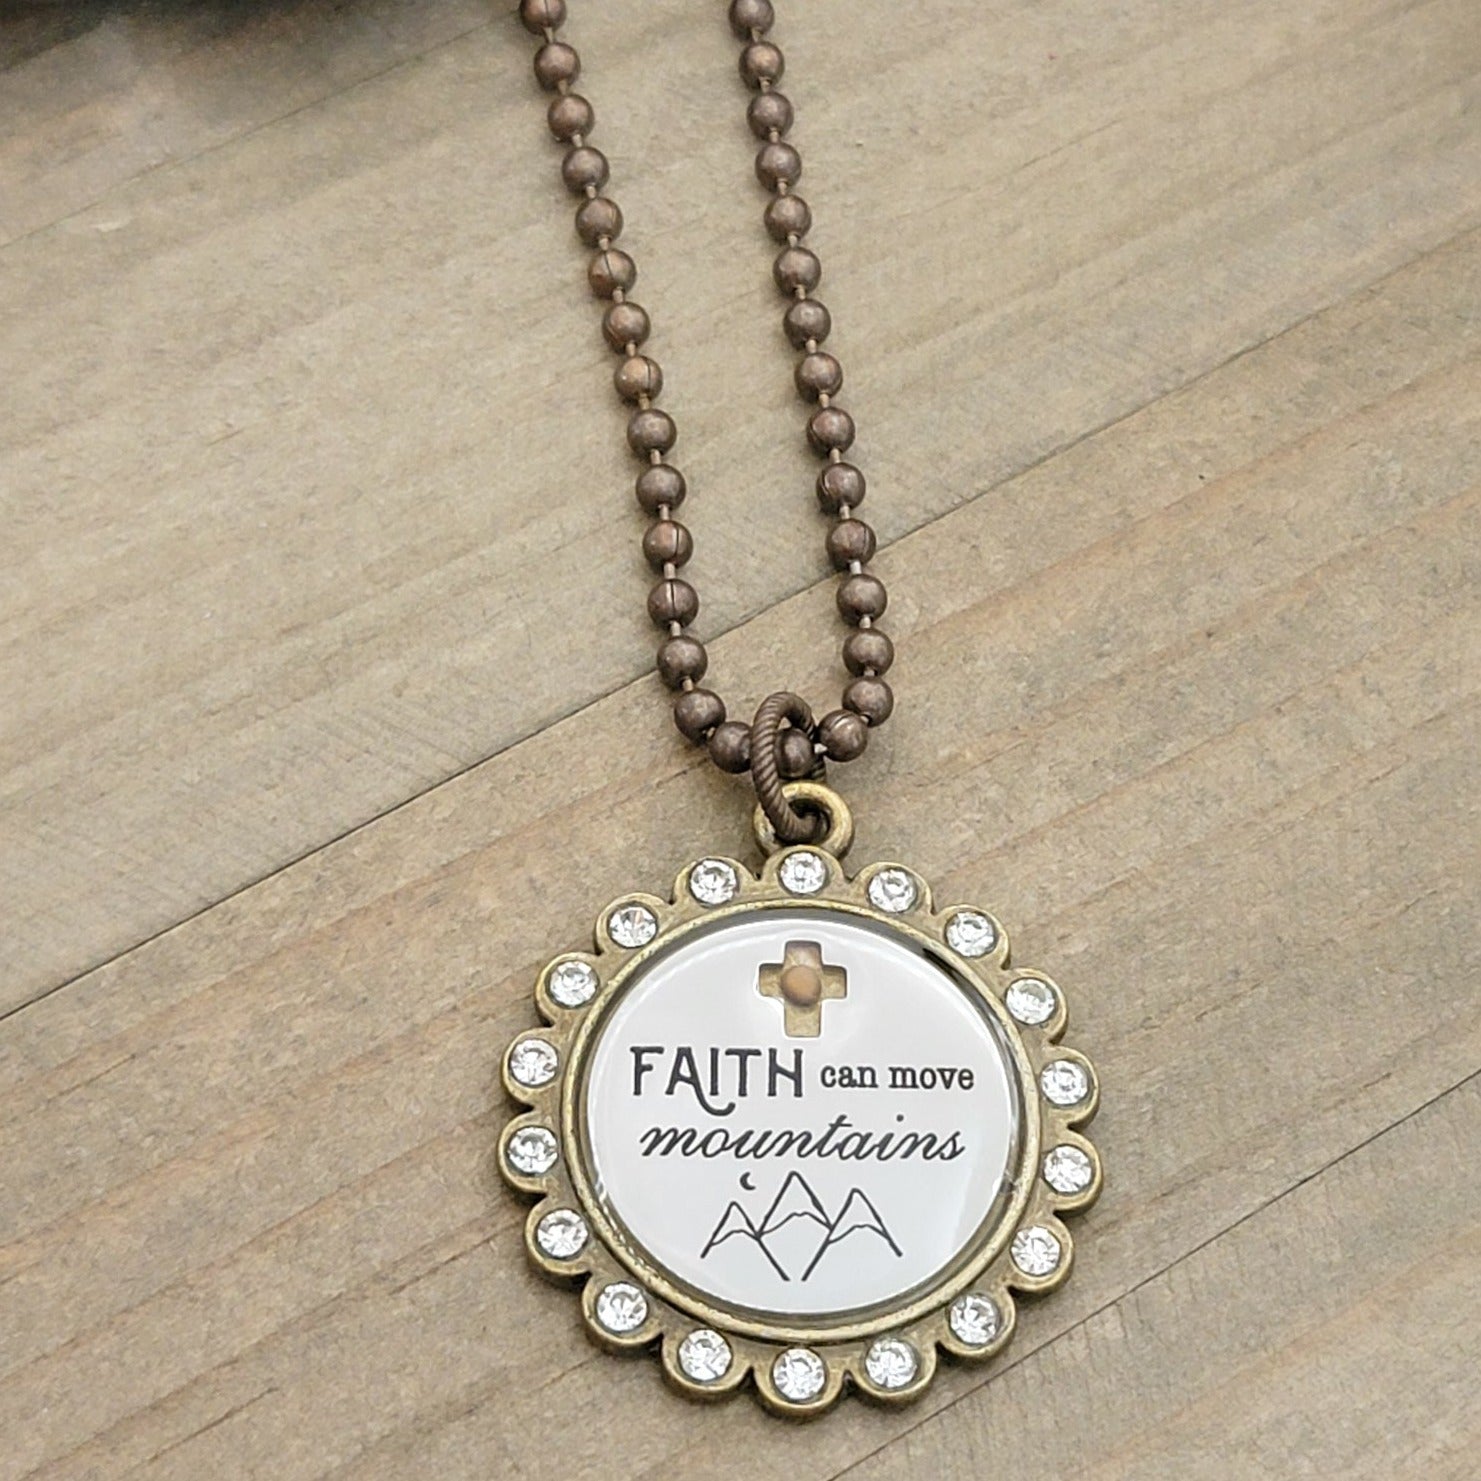 Faith Can Move Mountains Mustard Seed Necklace - Nicki Lynn Jewelry